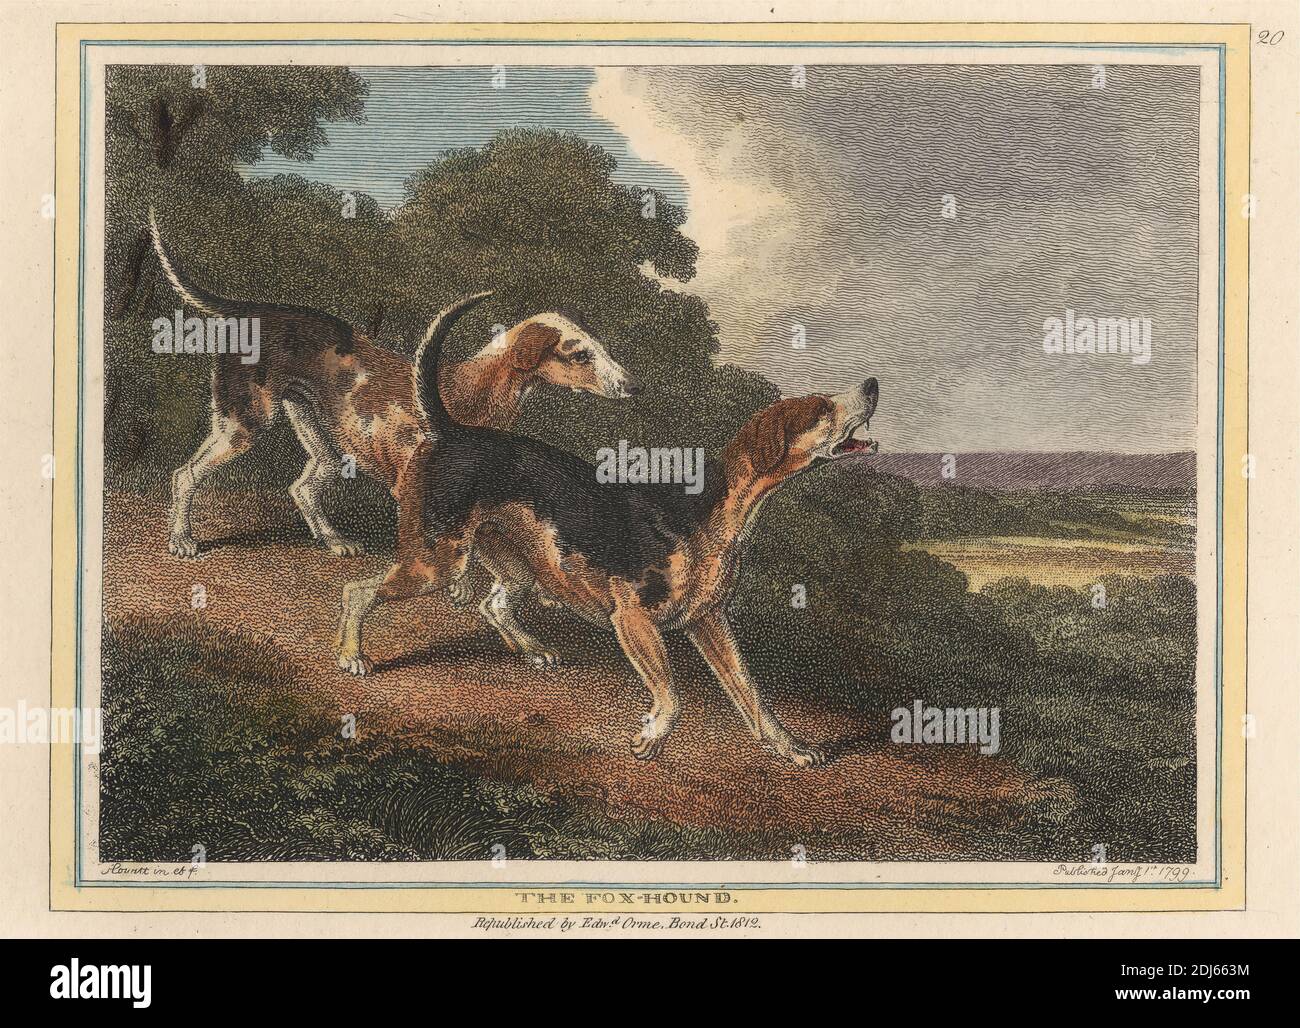 The Fox Hound, Print made by Samuel Howitt, 1756–1822, British, Published by Edward Orme, 1775–1848, British, 1812, Etching with hand coloring in watercolor on medium, slightly textured, cream wove paper Stock Photo